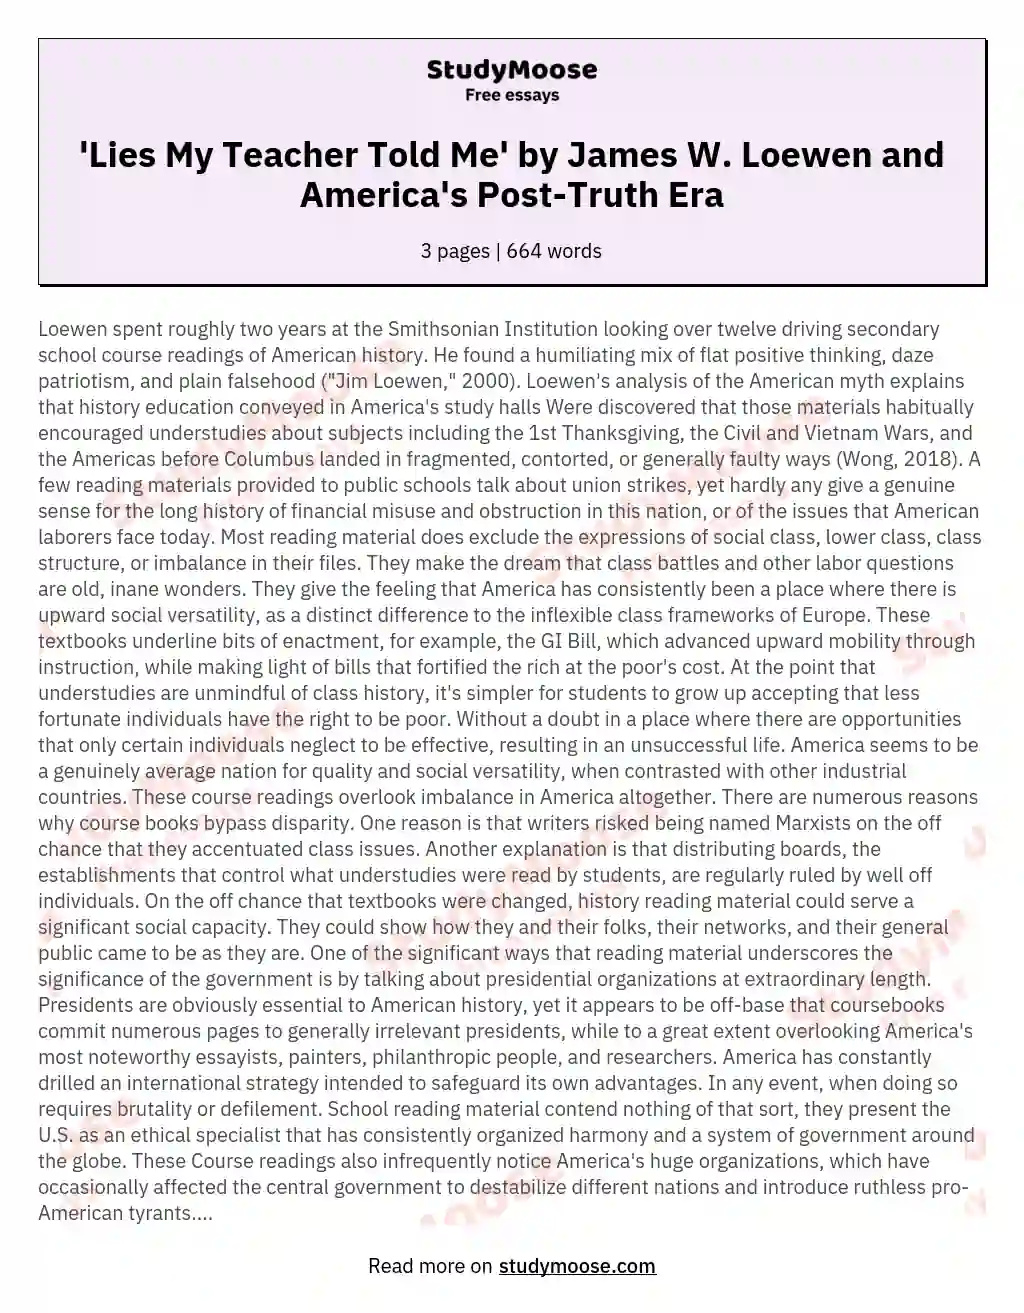 'Lies My Teacher Told Me' by James W. Loewen and America's Post-Truth Era